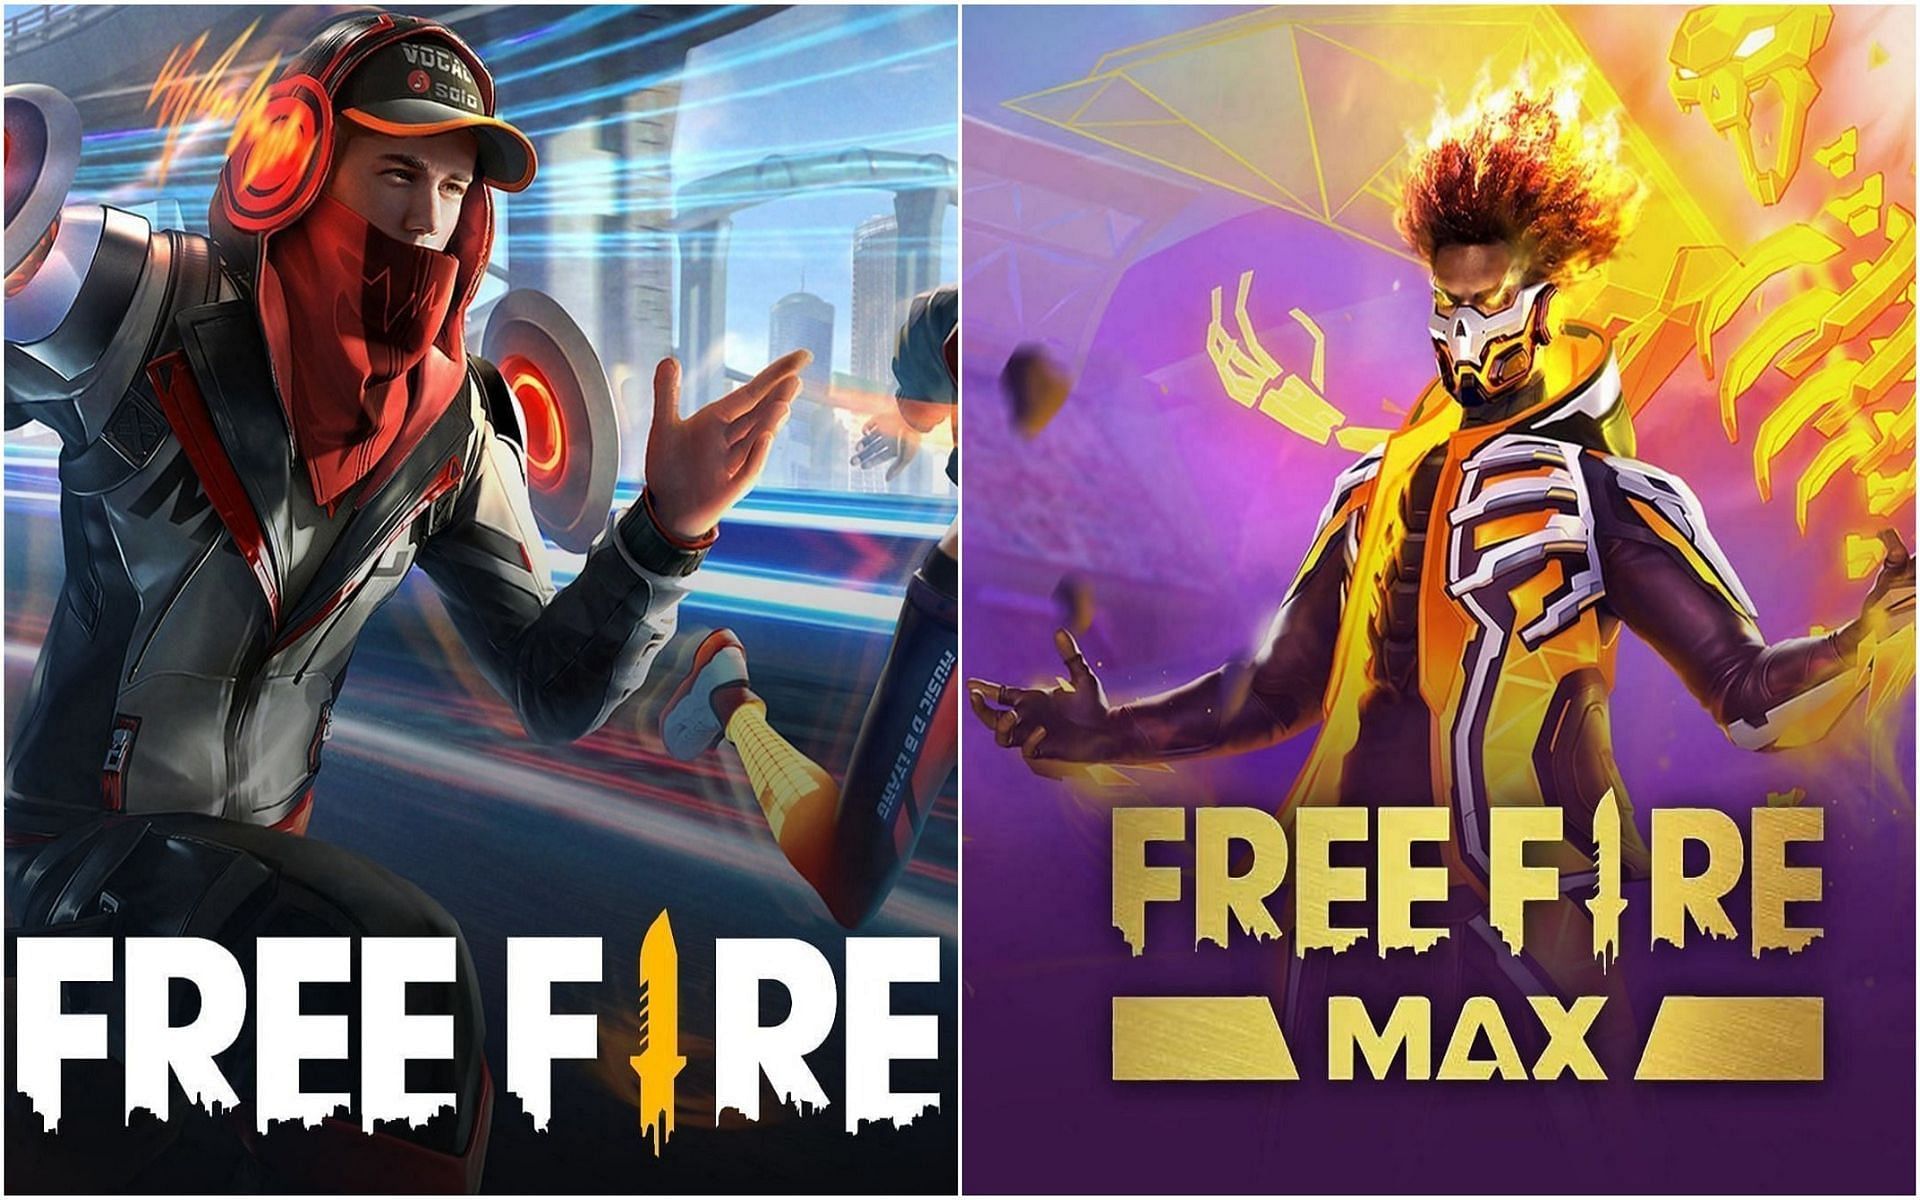 Both Free Fire and its MAX variant are essentially the same game (Image via Sportskeeda)